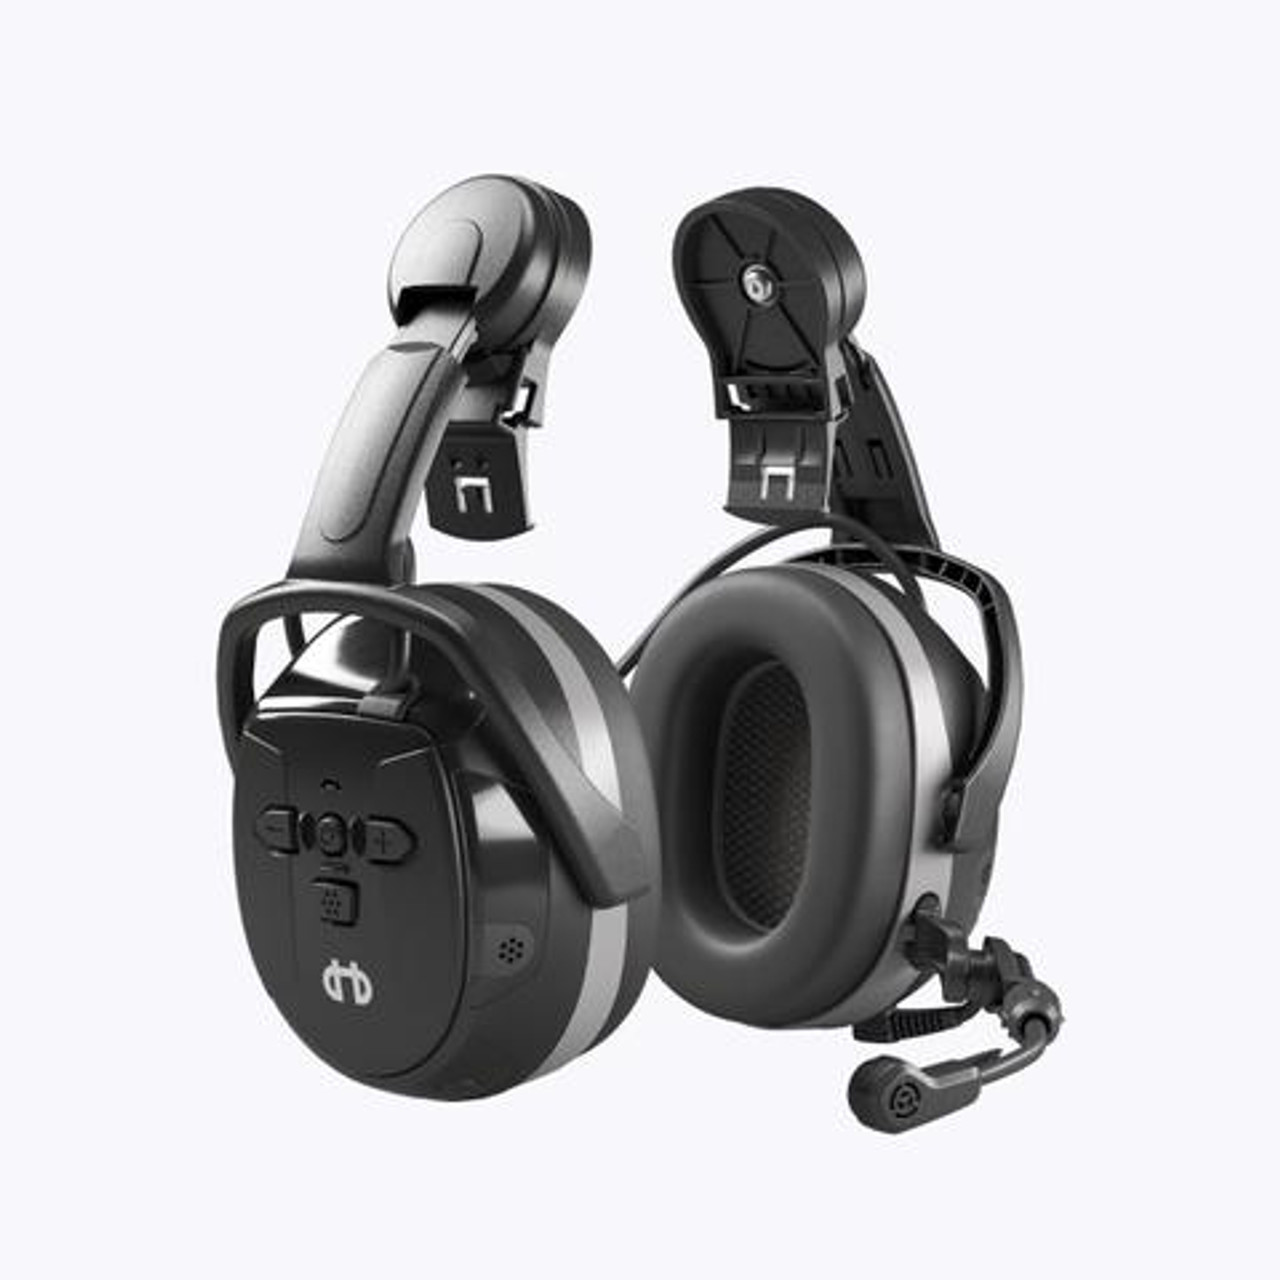 HELLBERG Hearing Protection | XSTREAM LD Bluetooth Earmuffs Hearing Protection with Active Monitoring and Waterproof in Helmet Version